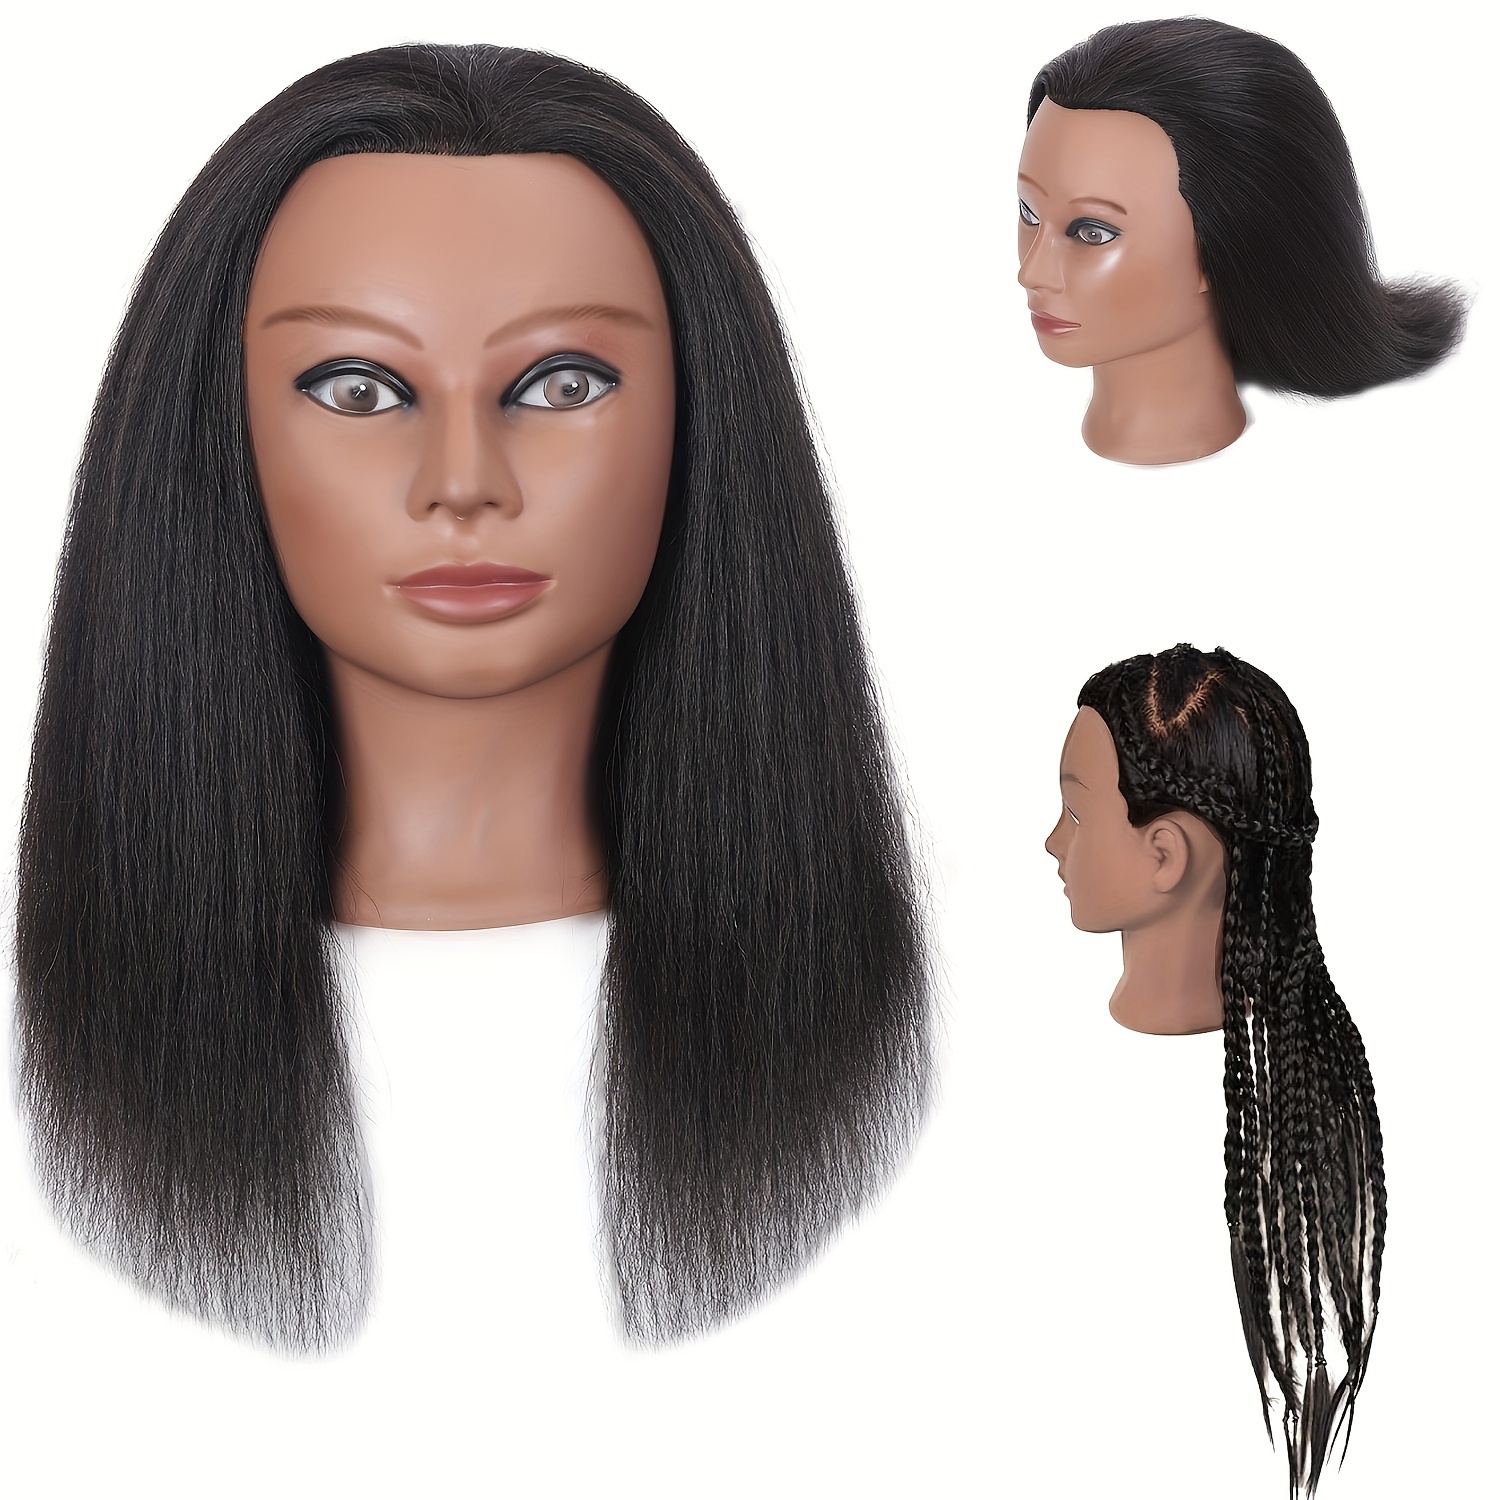 Mannequin Head With 85%Real Hair Hairdresser Practice Training